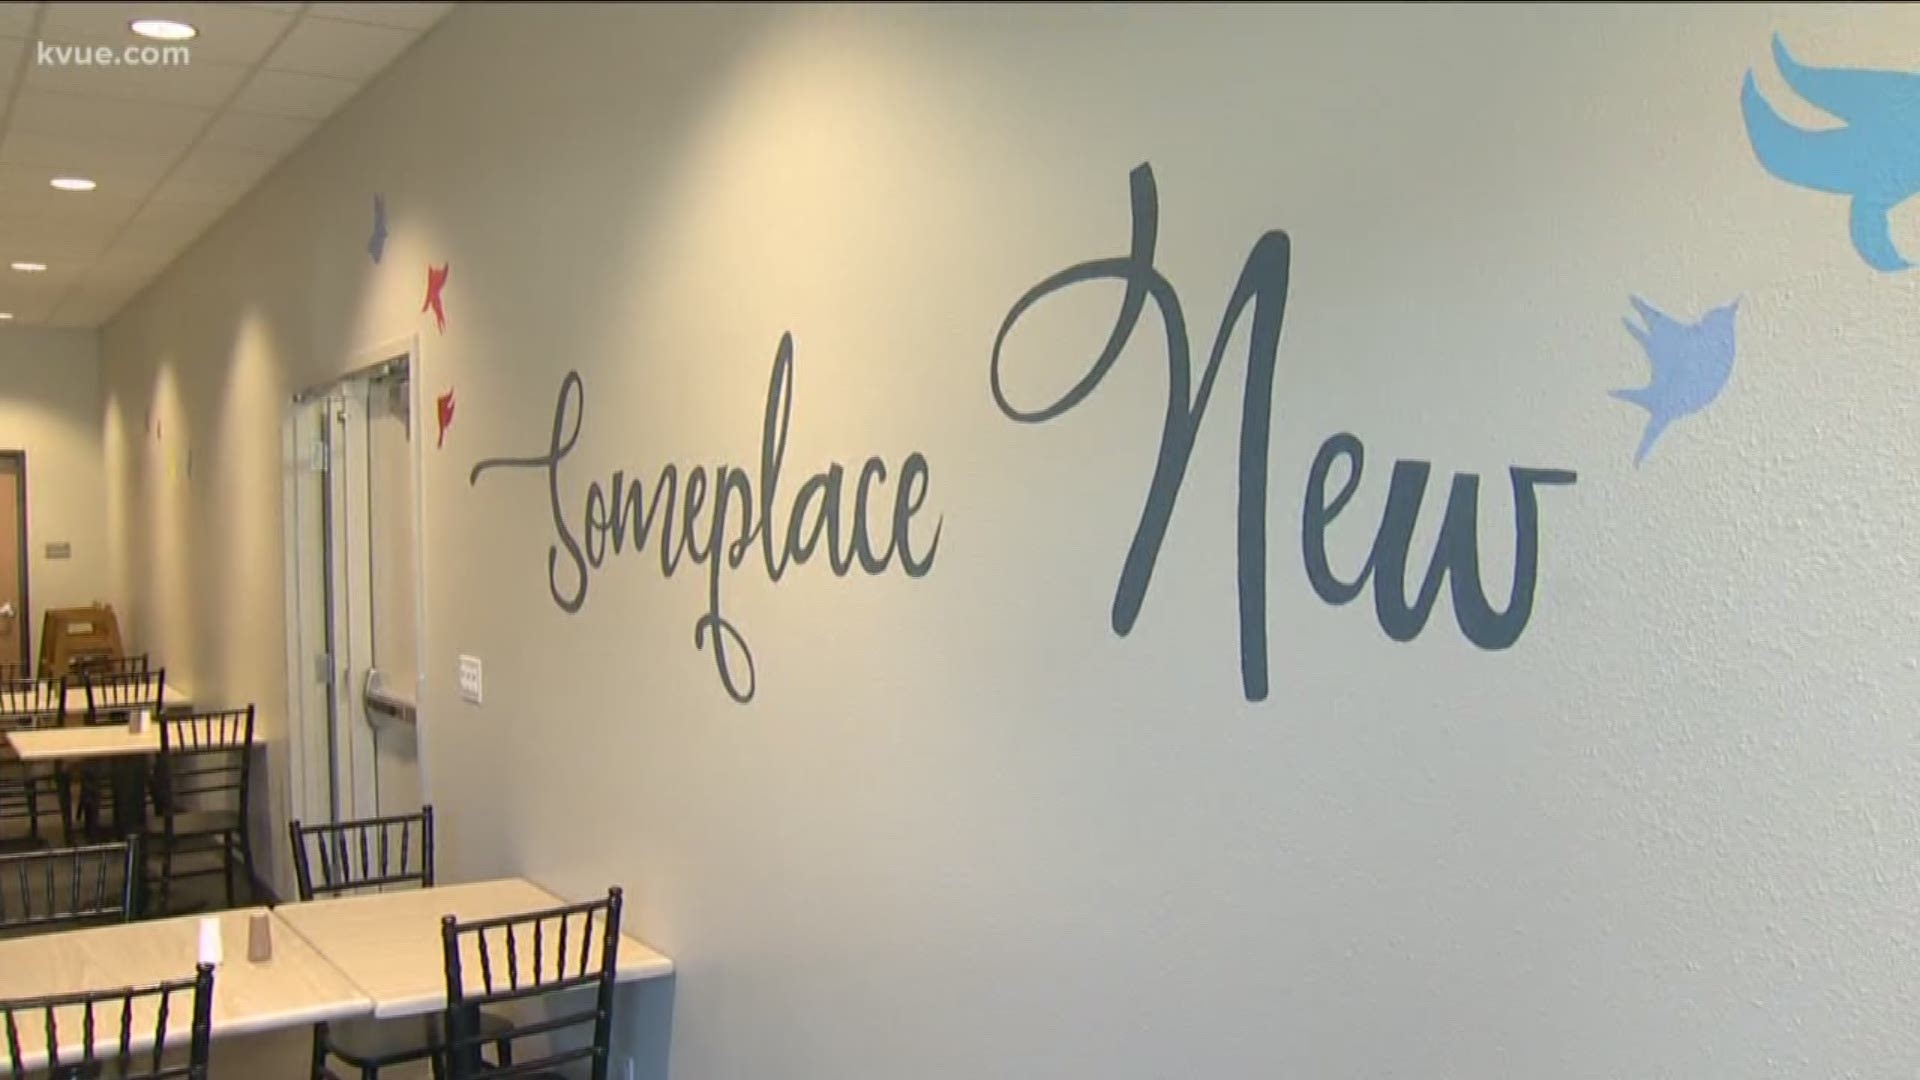 Wednesday was move-in day at Austin's newest homeless shelter.